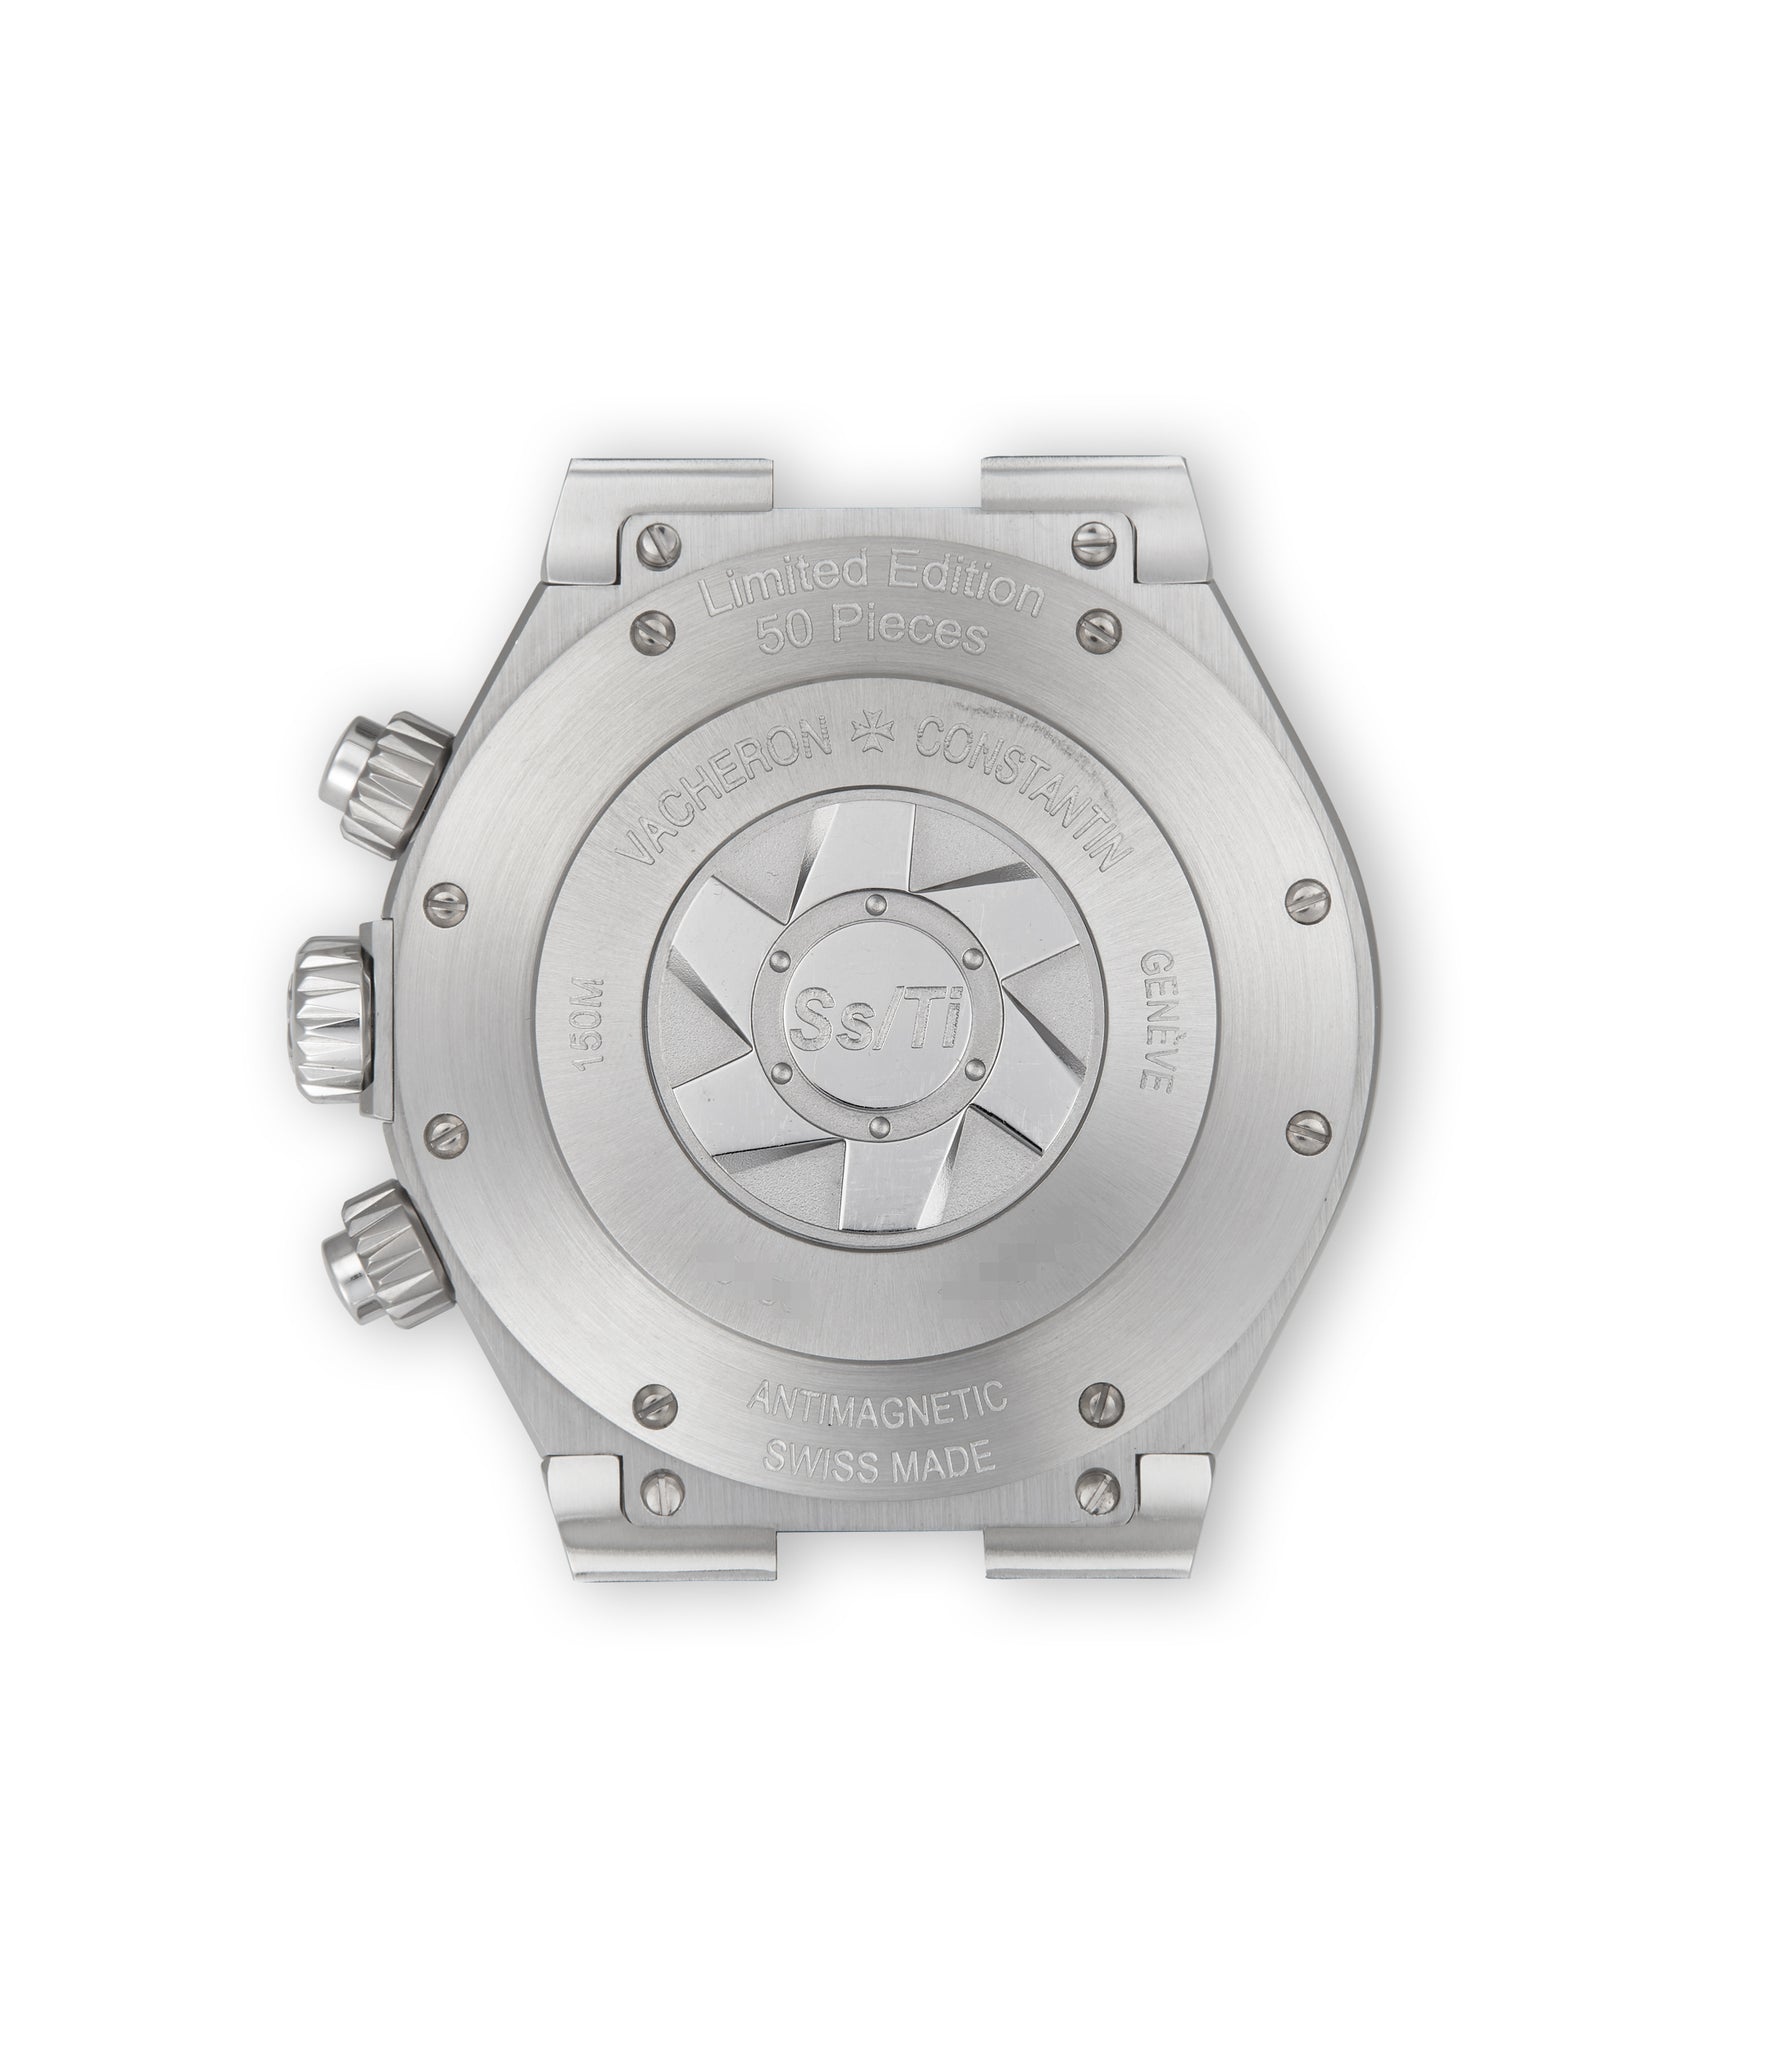 Vacheron Constantin Overseas 49150 Stainless Steel | Available worldwide at A Collected Man | Back of watch